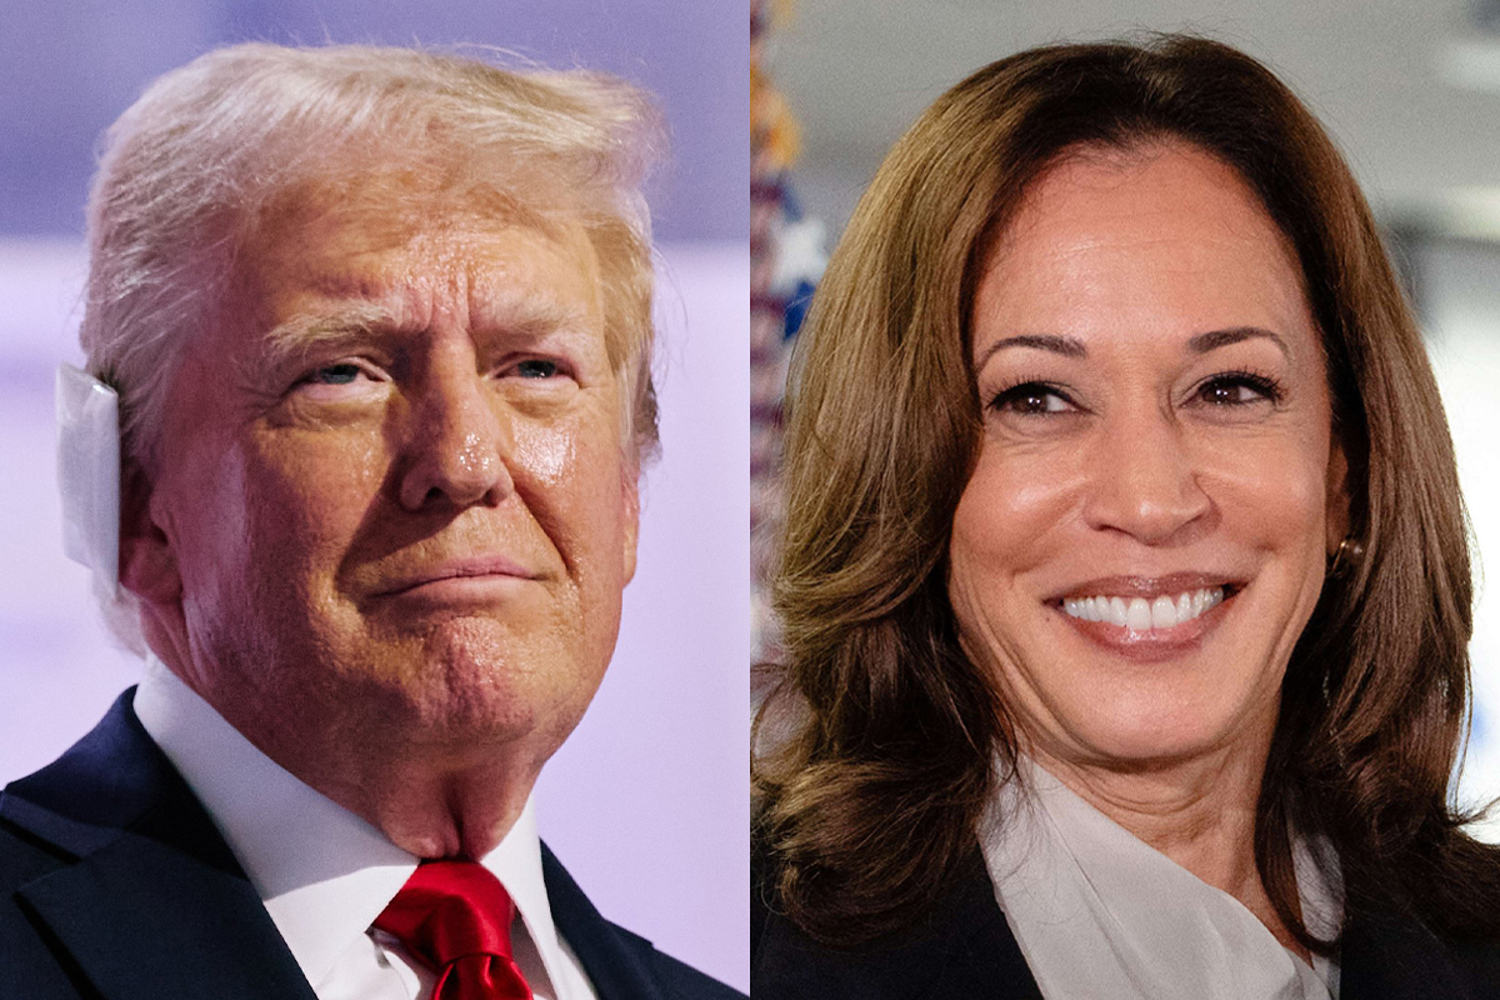 Excitement over Harris campaign 'scares' Trump supporters 